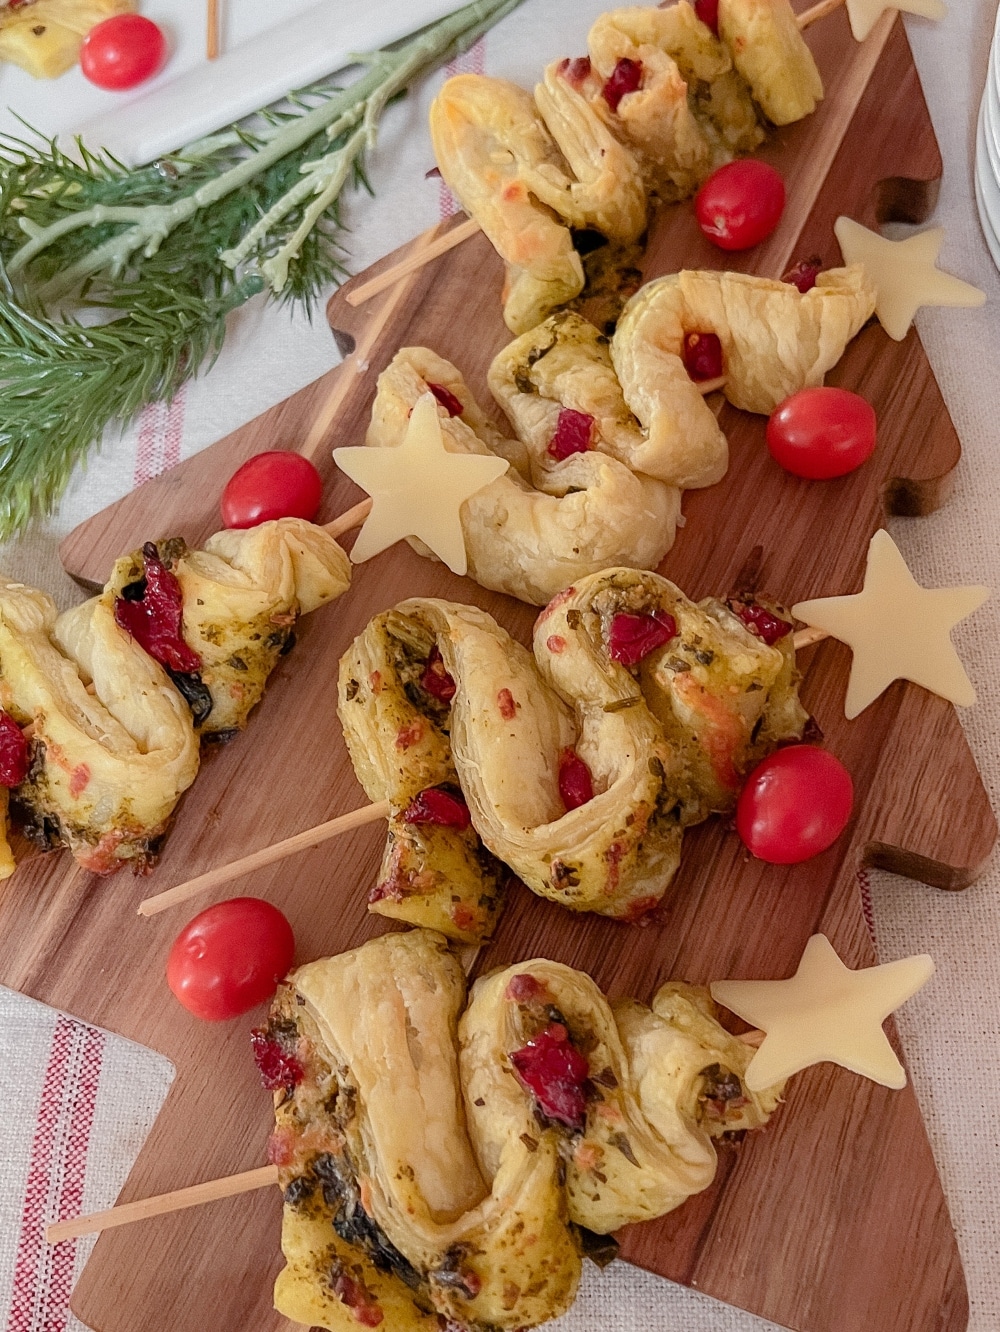 Savory Puff Pastry Pesto Tree Appetizer. Effortlessly elevate your holiday spread with the easy yet upscale Savory Puff Pastry Pesto Tree, boasting flaky layers, basil pesto, sun-dried tomatoes, and a classy cheesy star.